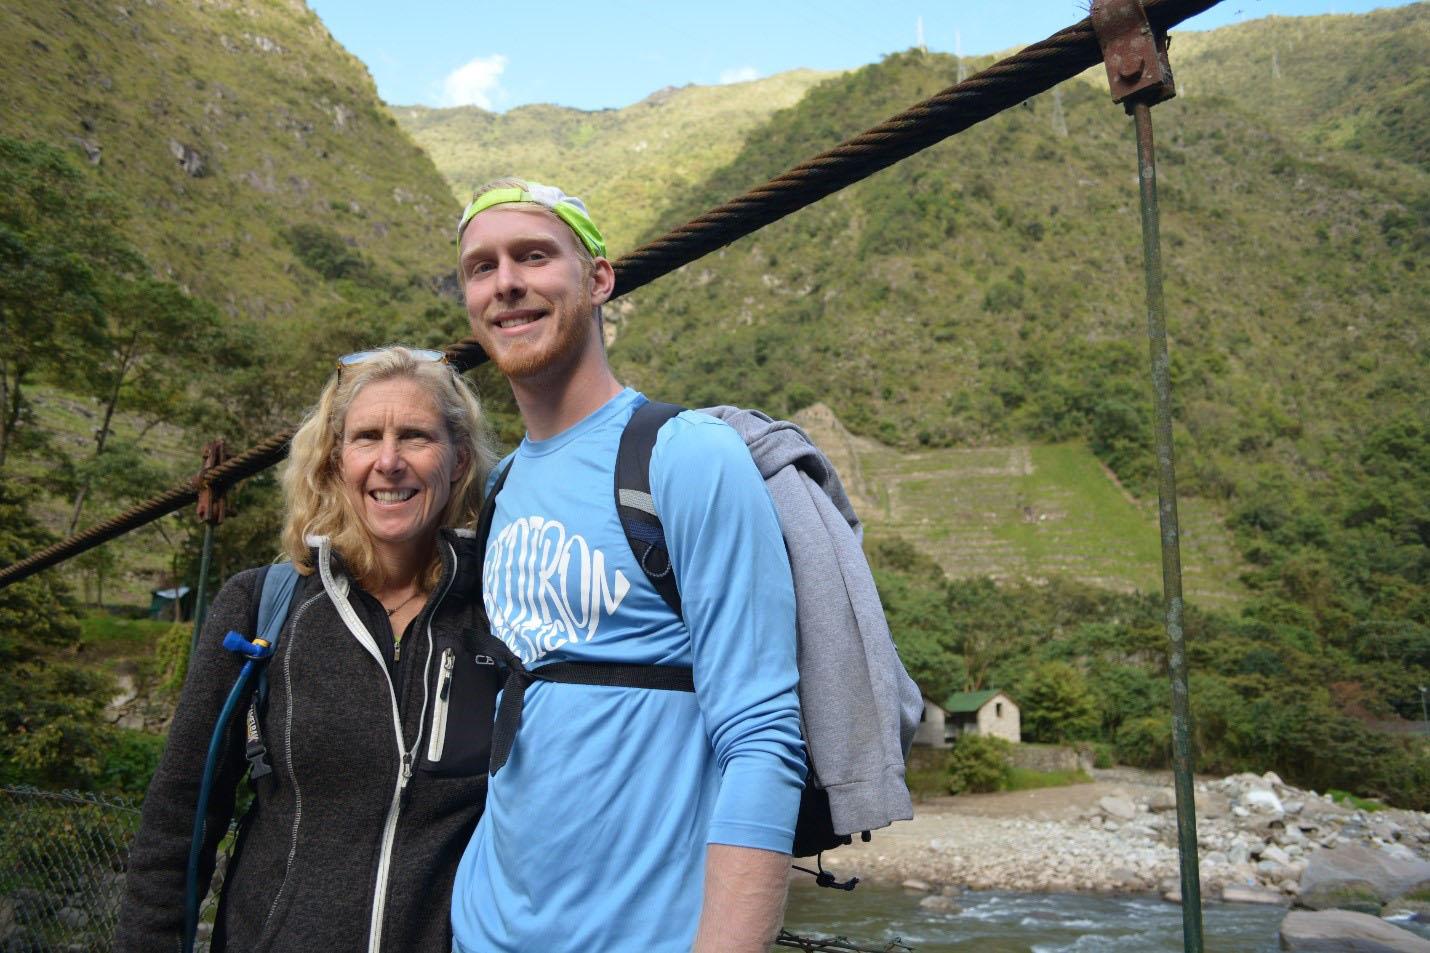 Karin and Justin Daun, a mother and son, hiked to Machu Picchu after a mission trip in Peru in 2017. The two returned to Peru for mission trips in 2018 and 2019 and hope to return in 2021.